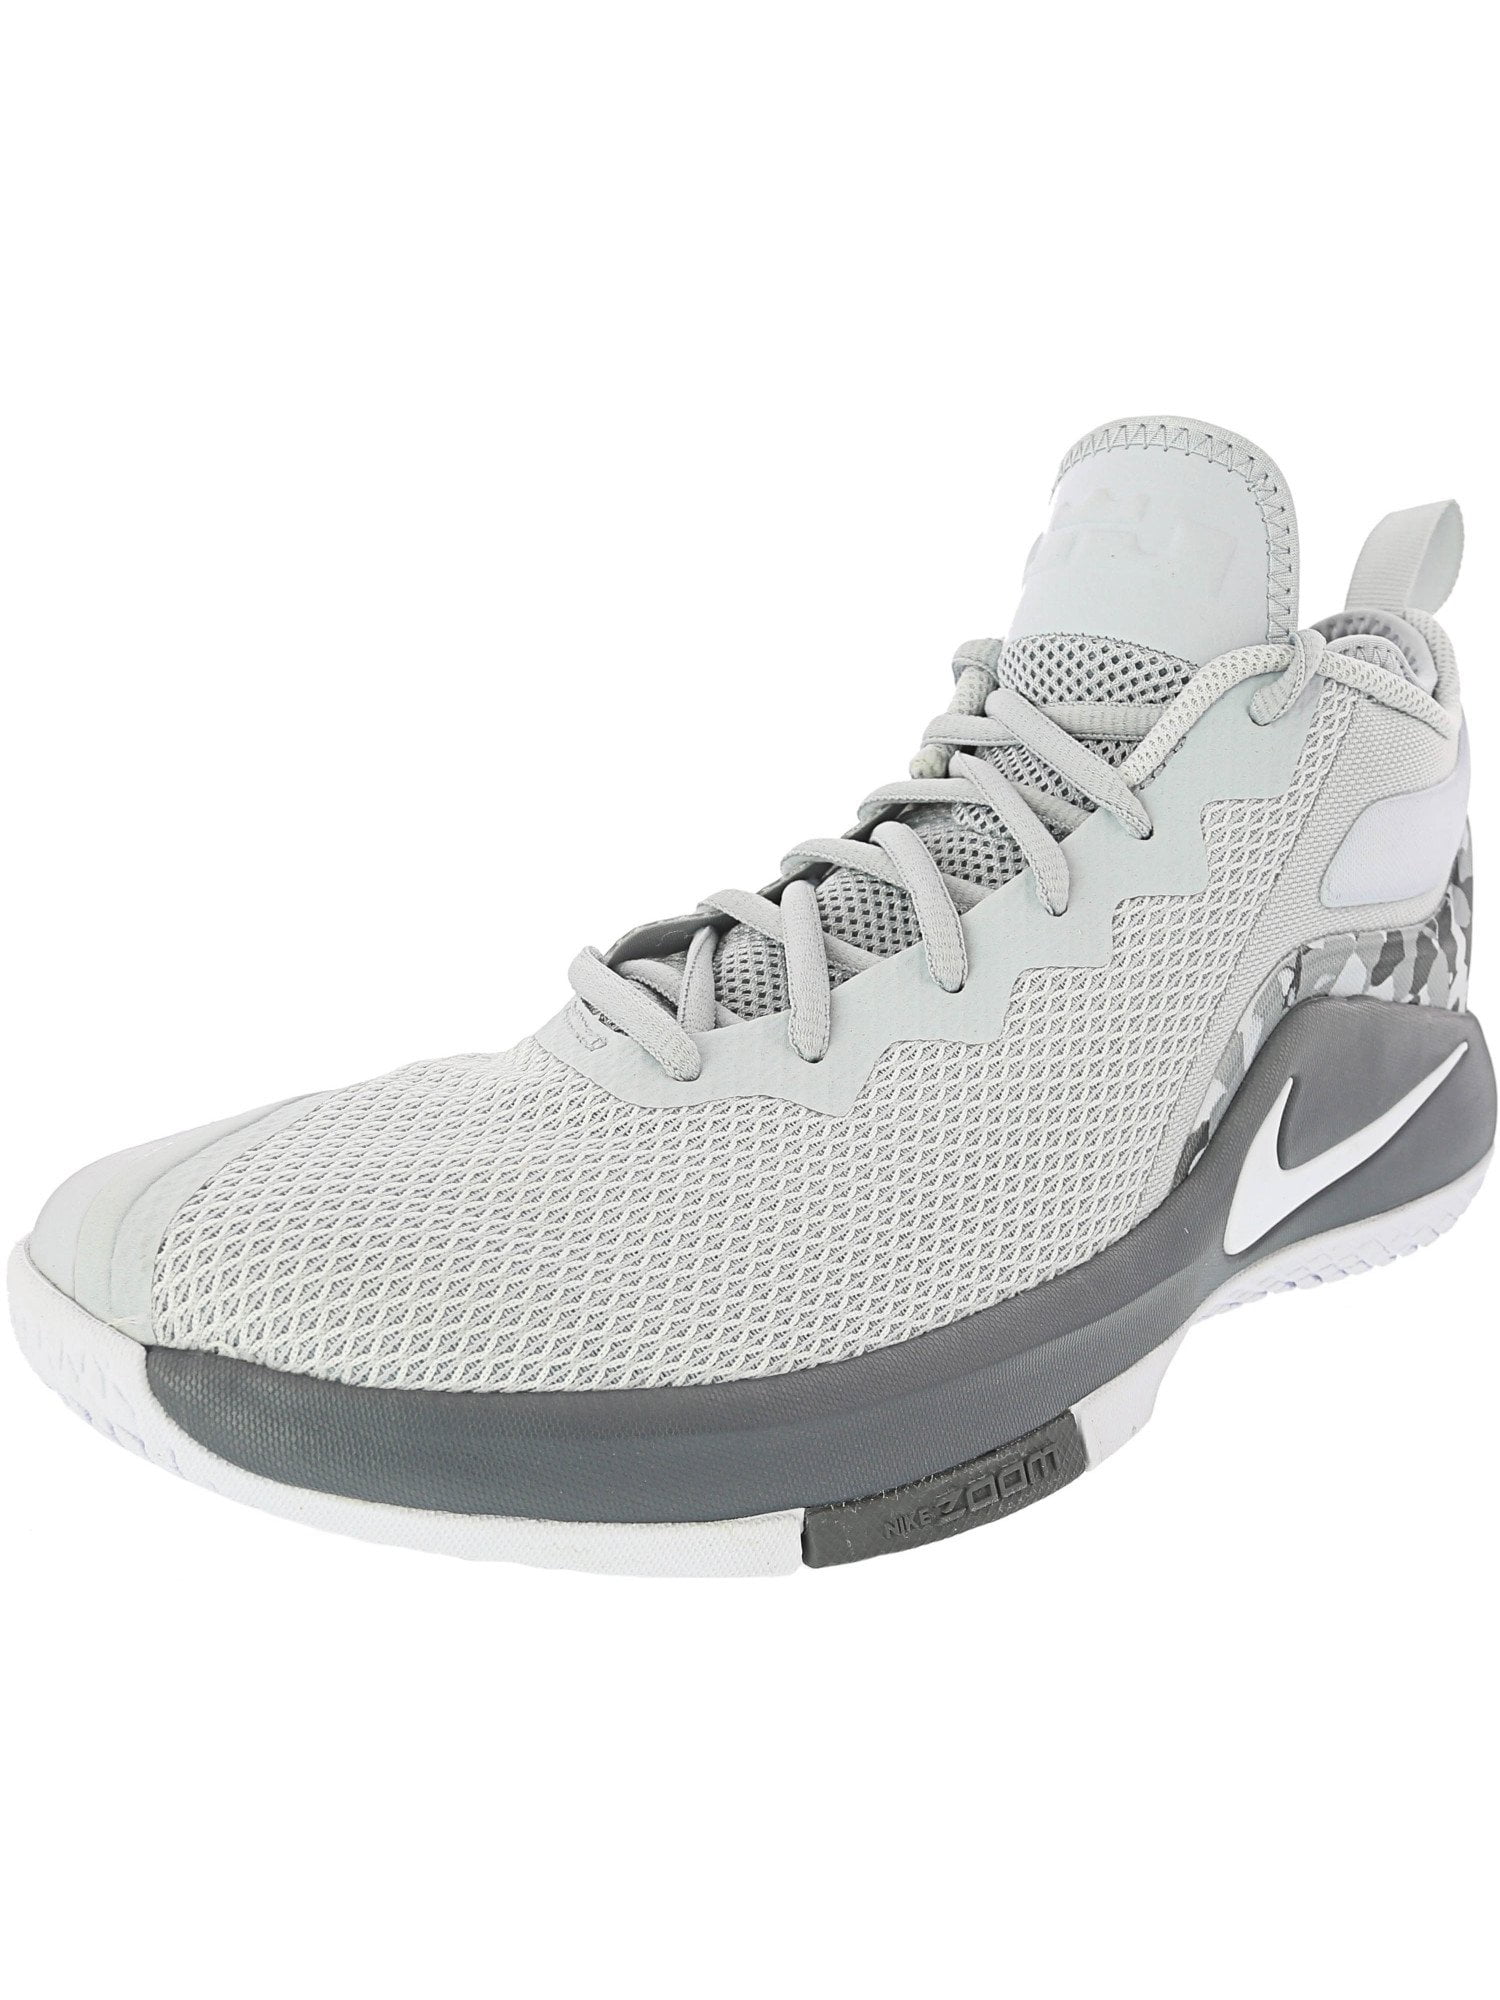 Cool Grey Ankle-High Basketball Shoe 